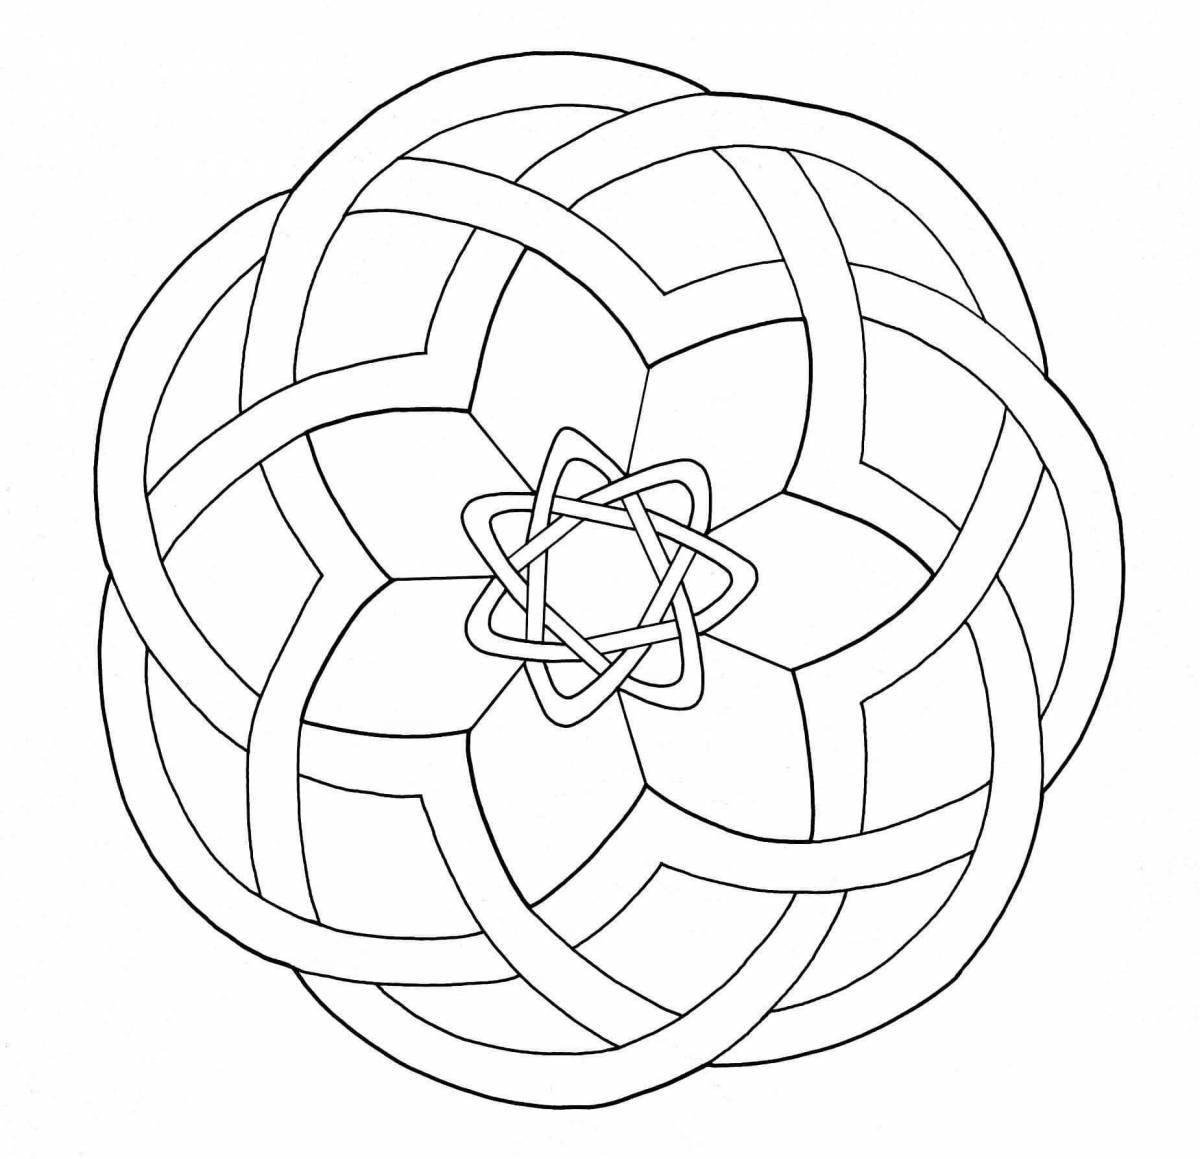 Gorgeous coloring page ornament